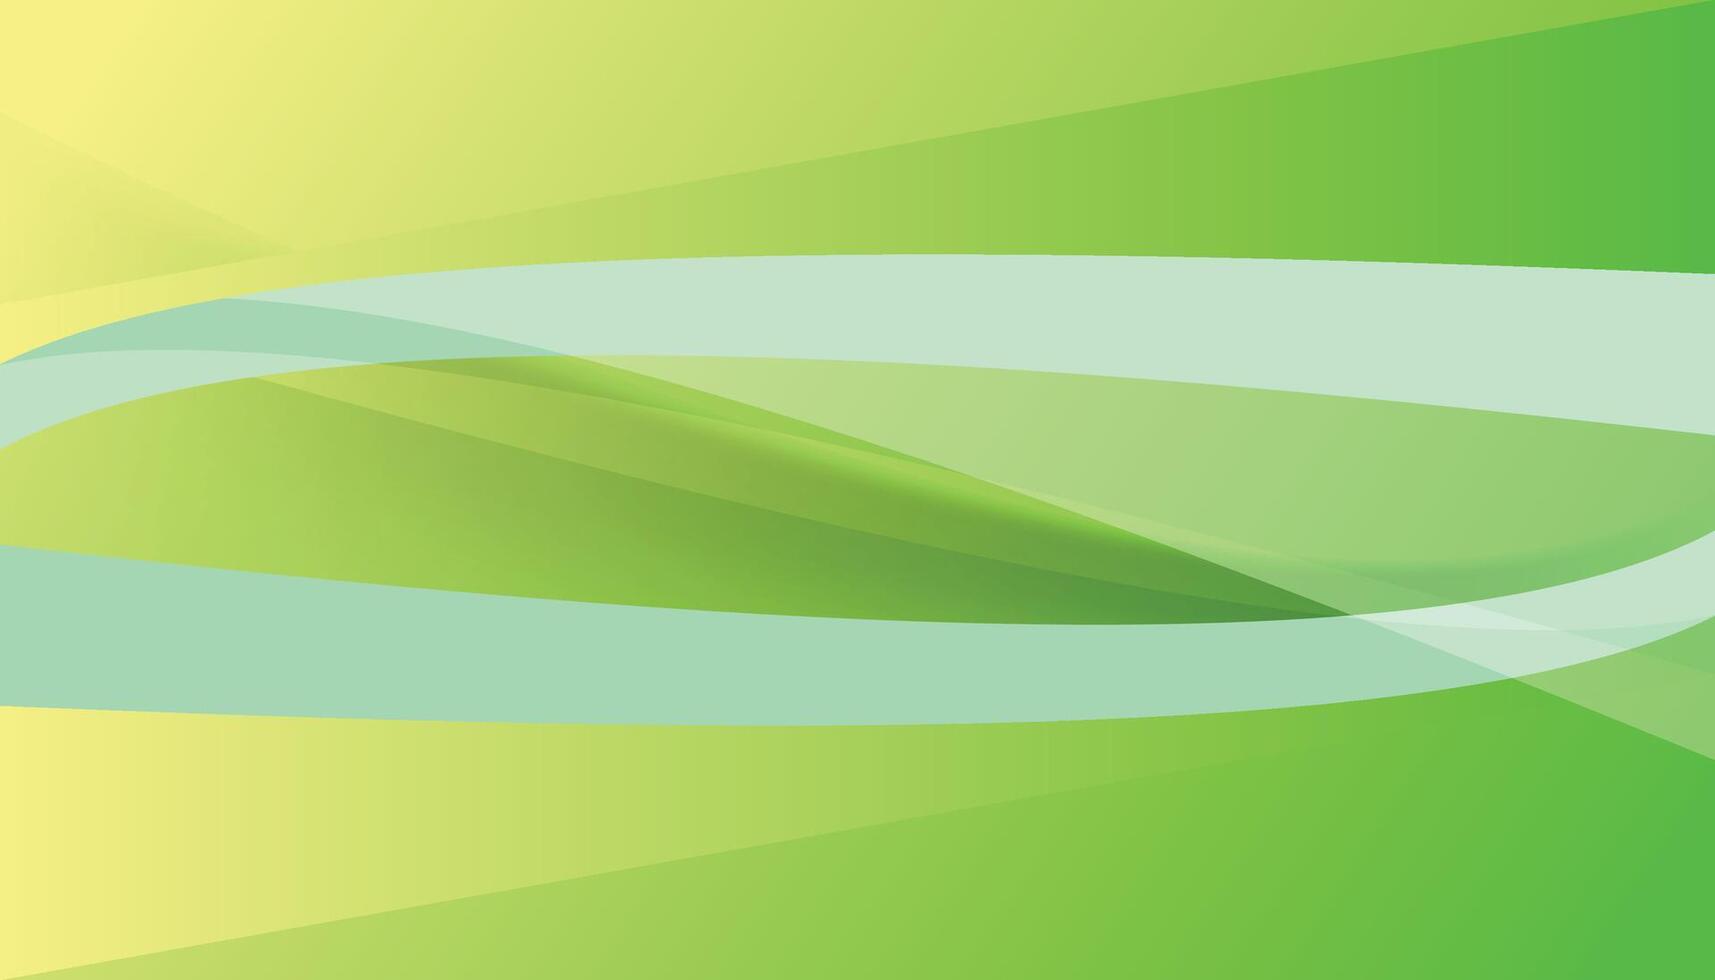 Green wallpaper and background download free vector